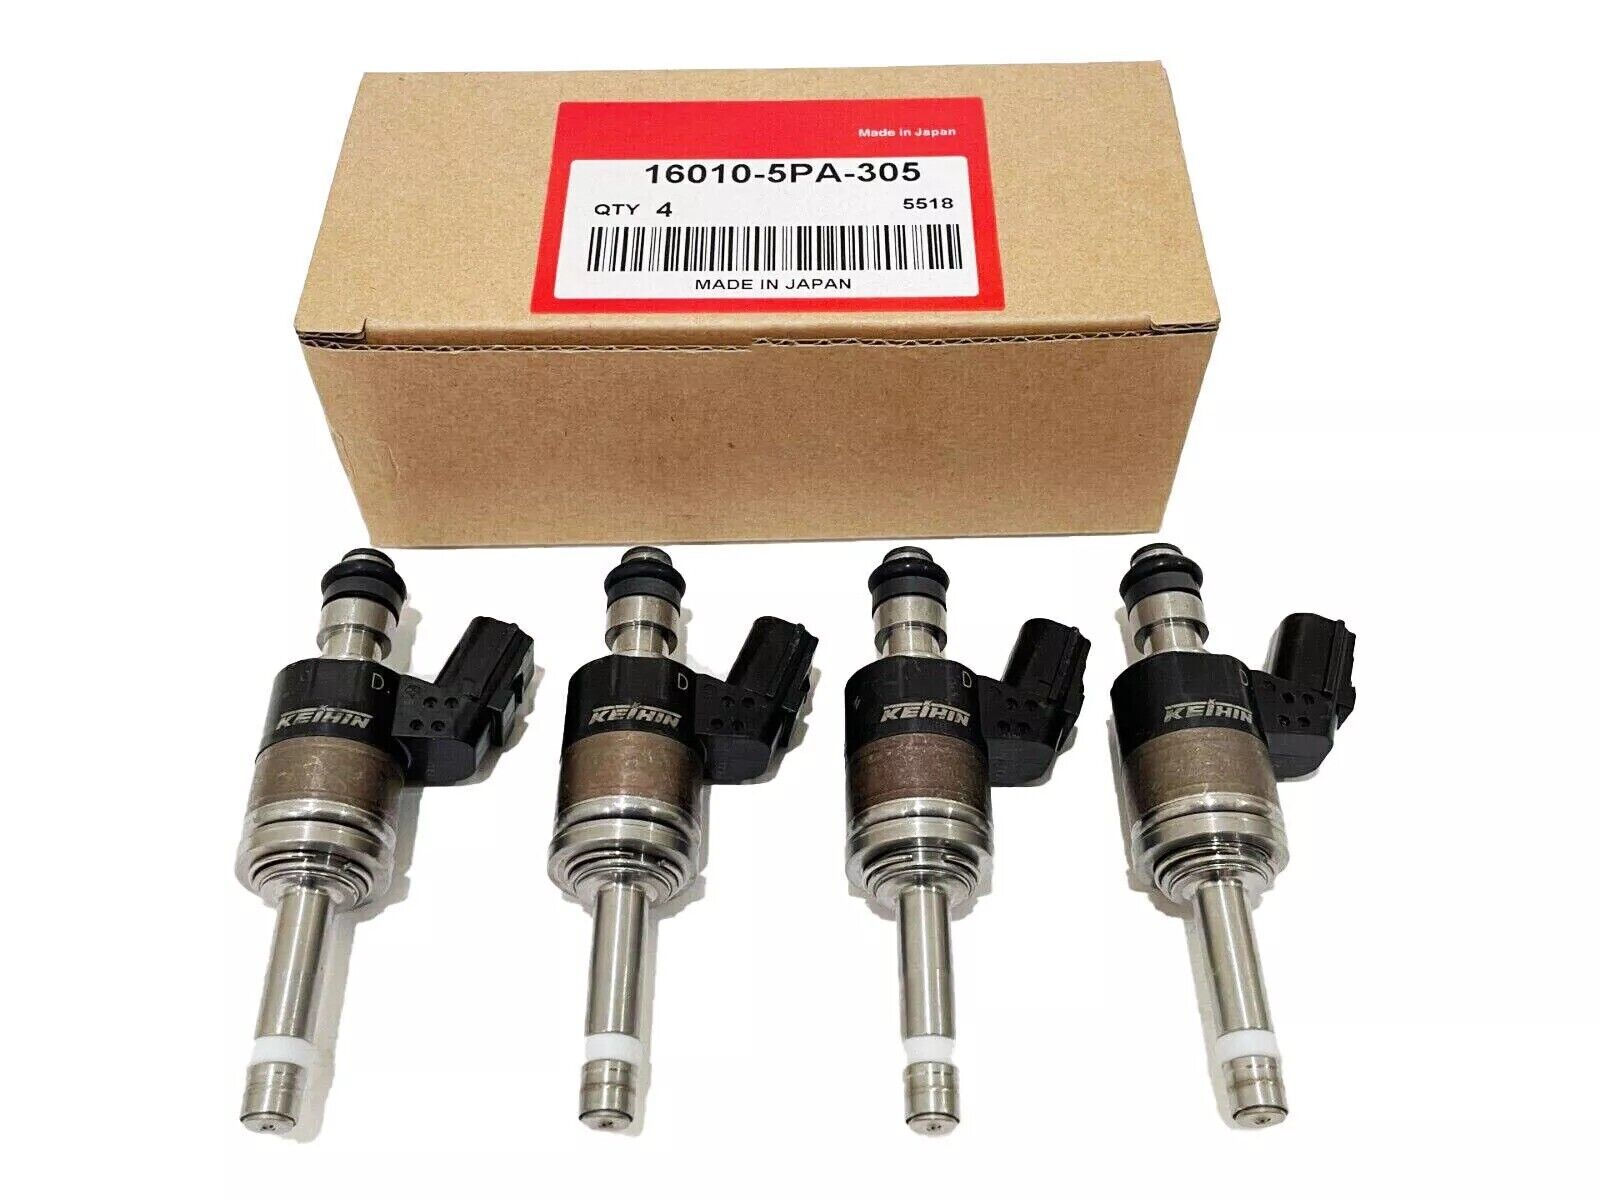 NEW Fuel Injectors 16010-5PA-305 Fit For ACCORD 2018-2020 CR-V CIVIC 1.5L TURBO 